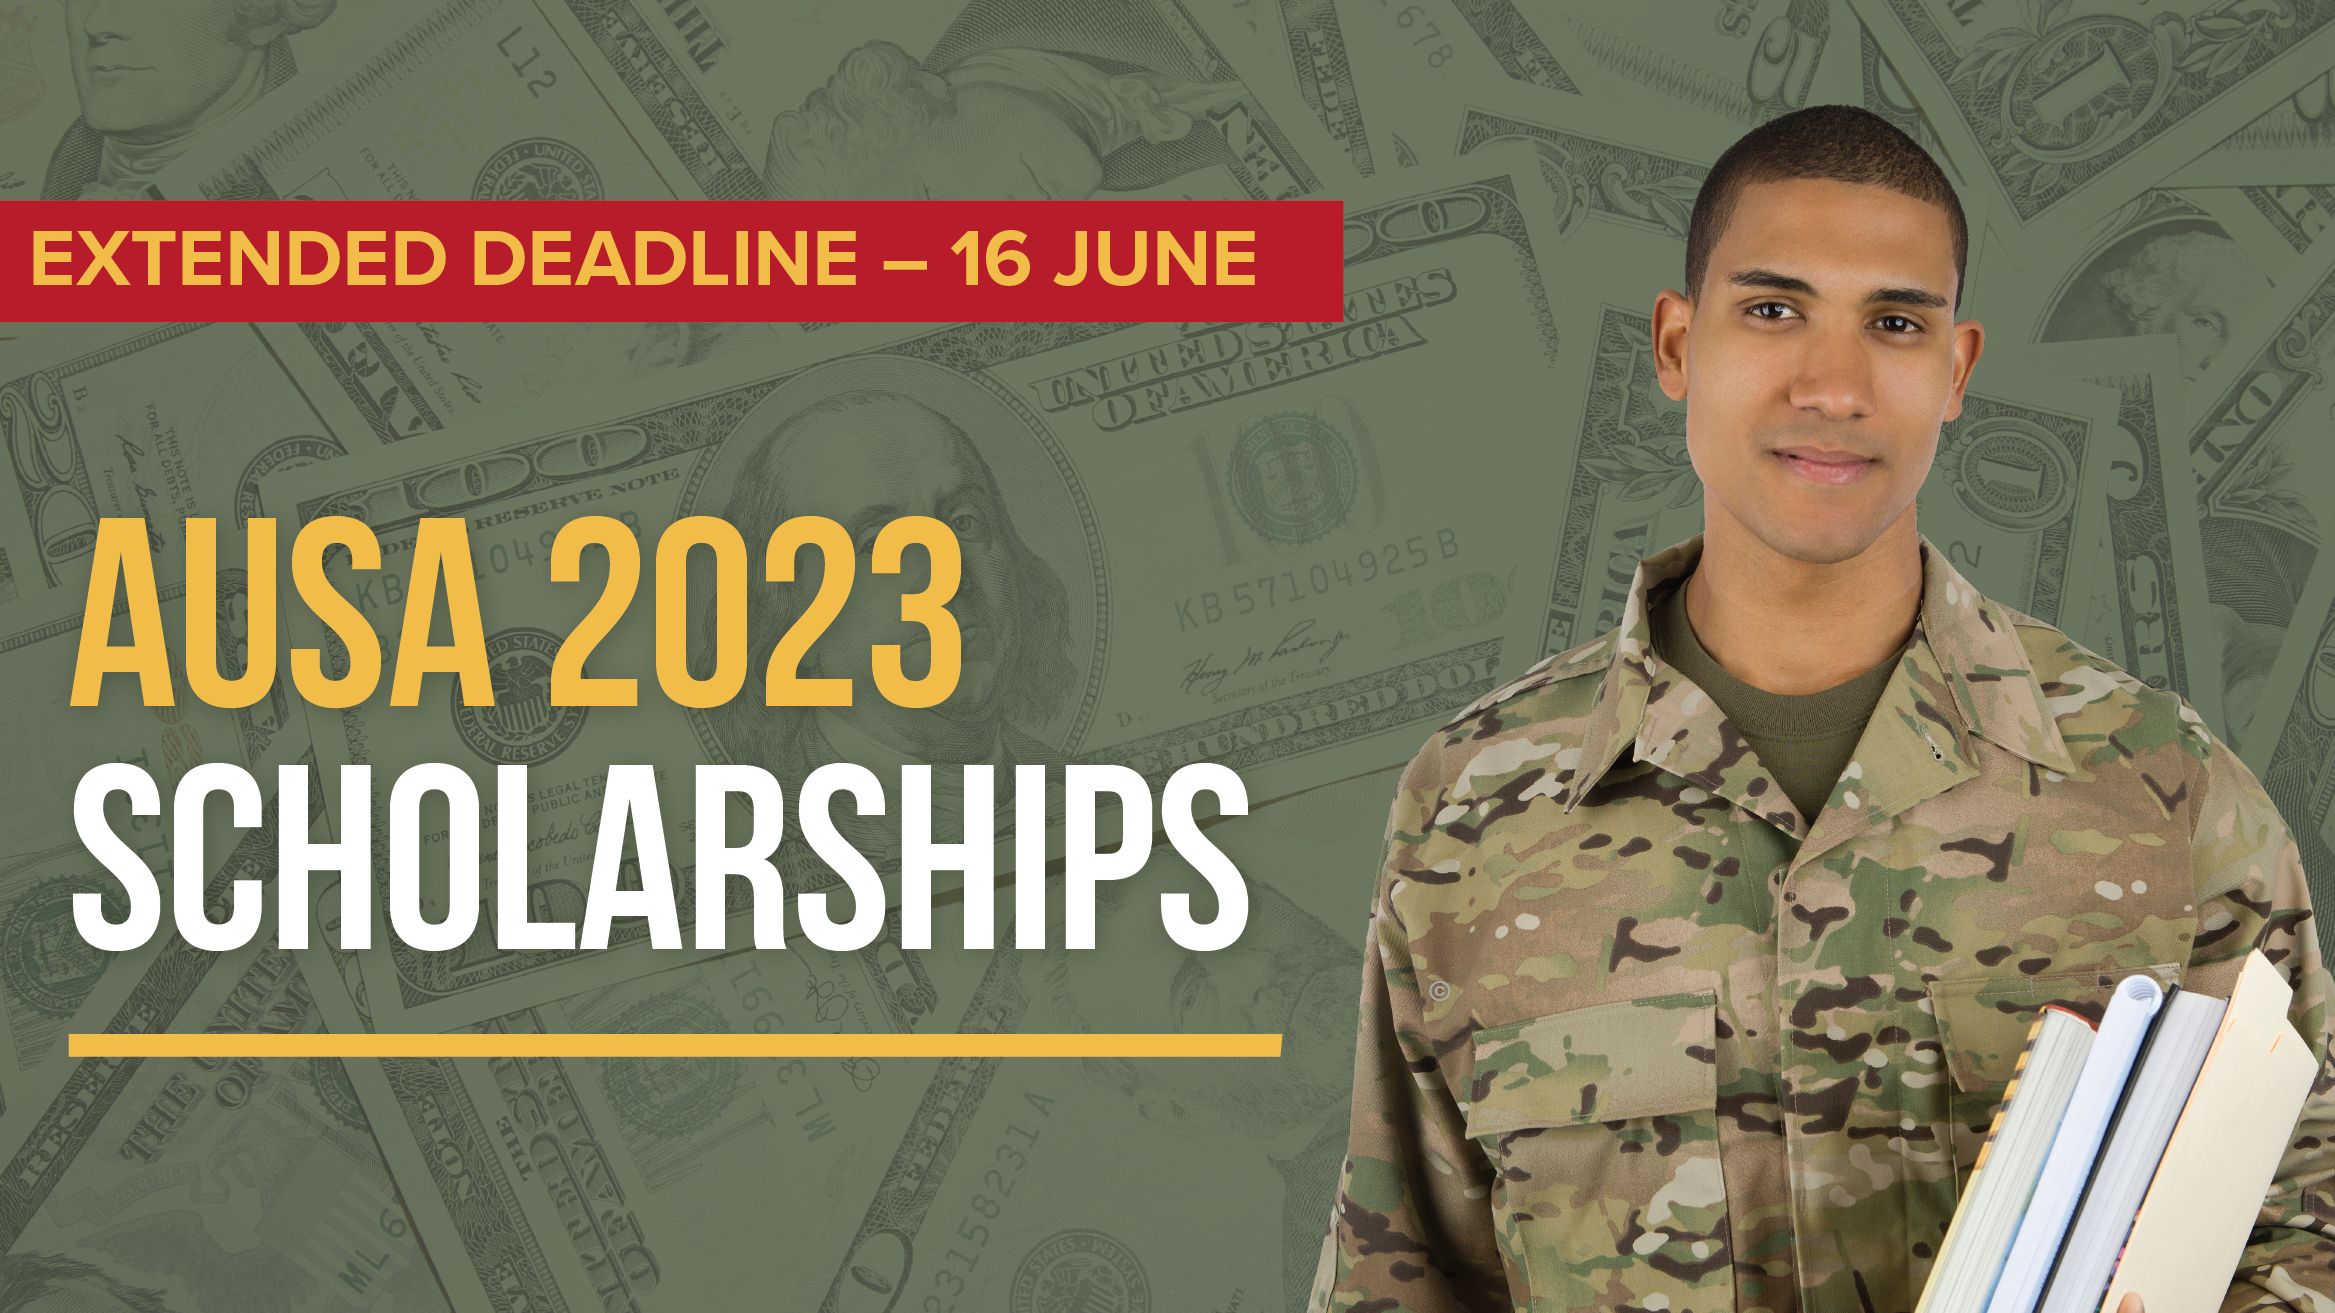 AUSA scholarships extended